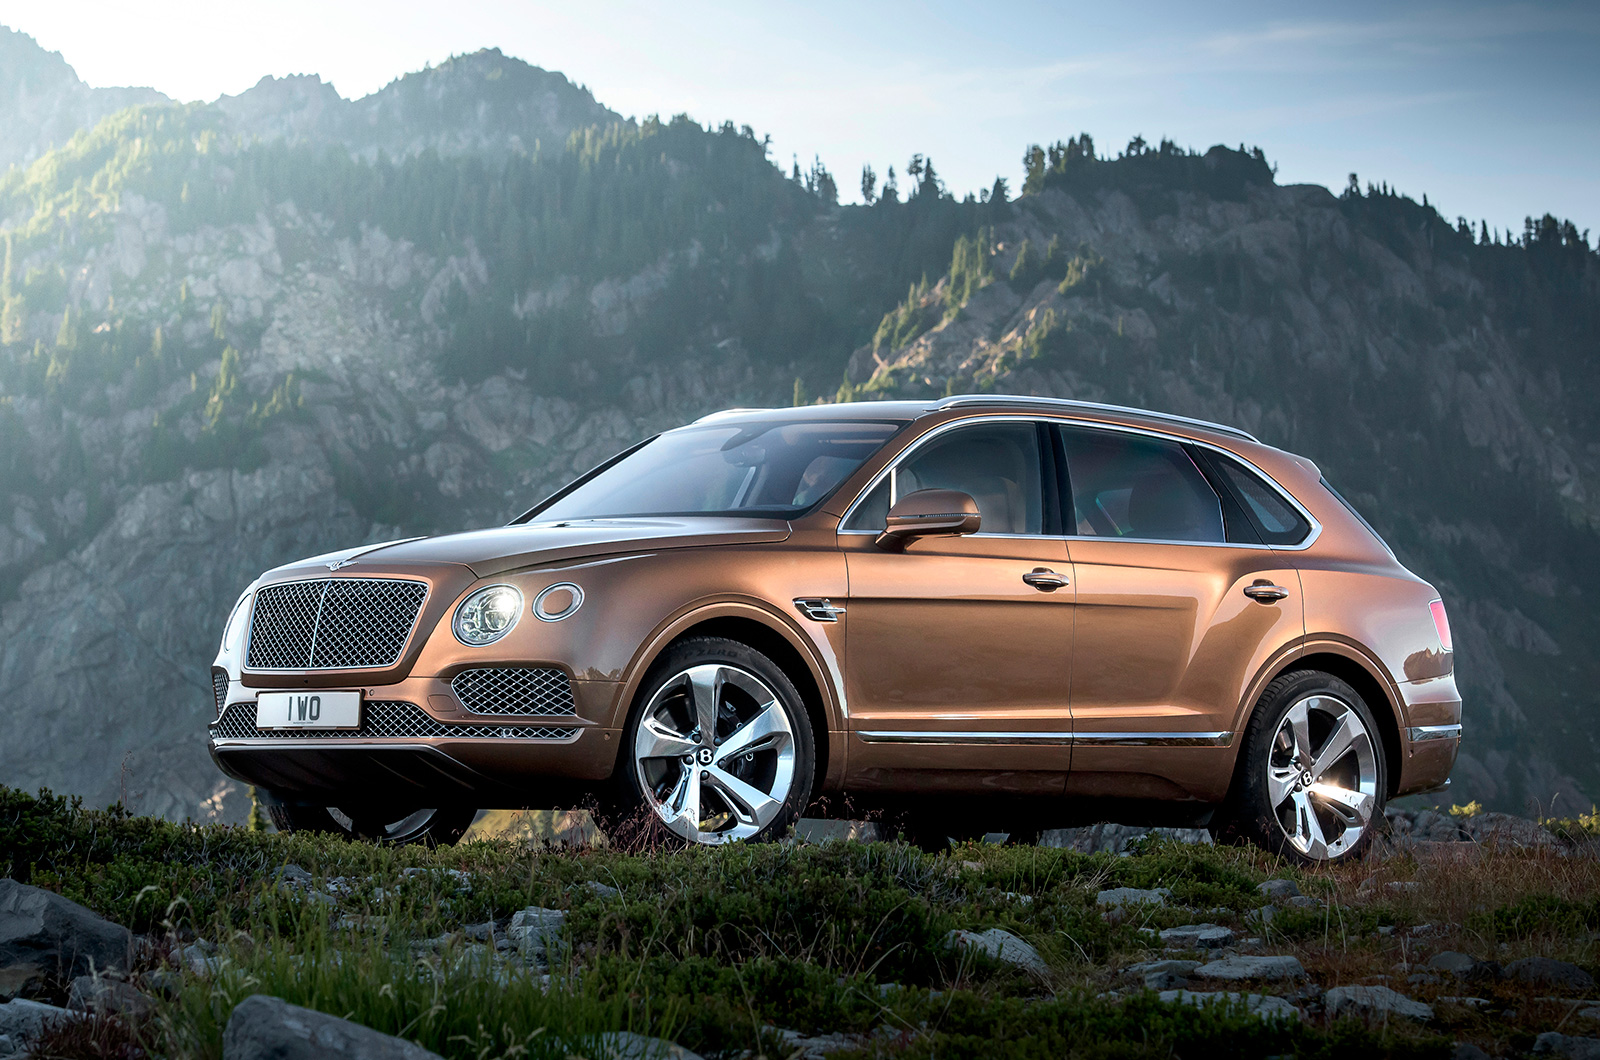 <p>When it arrived the <strong>Bentley Bentayga </strong>reflected some elements of the EXP 9 F concept car of three years earlier, though many extreme details had been toned down. At launch there was a twin-turbo W12 petrol engine with cylinder deactivation, but later would come V8 petrol and diesel powerplants, along with a plug-in hybrid edition.</p>